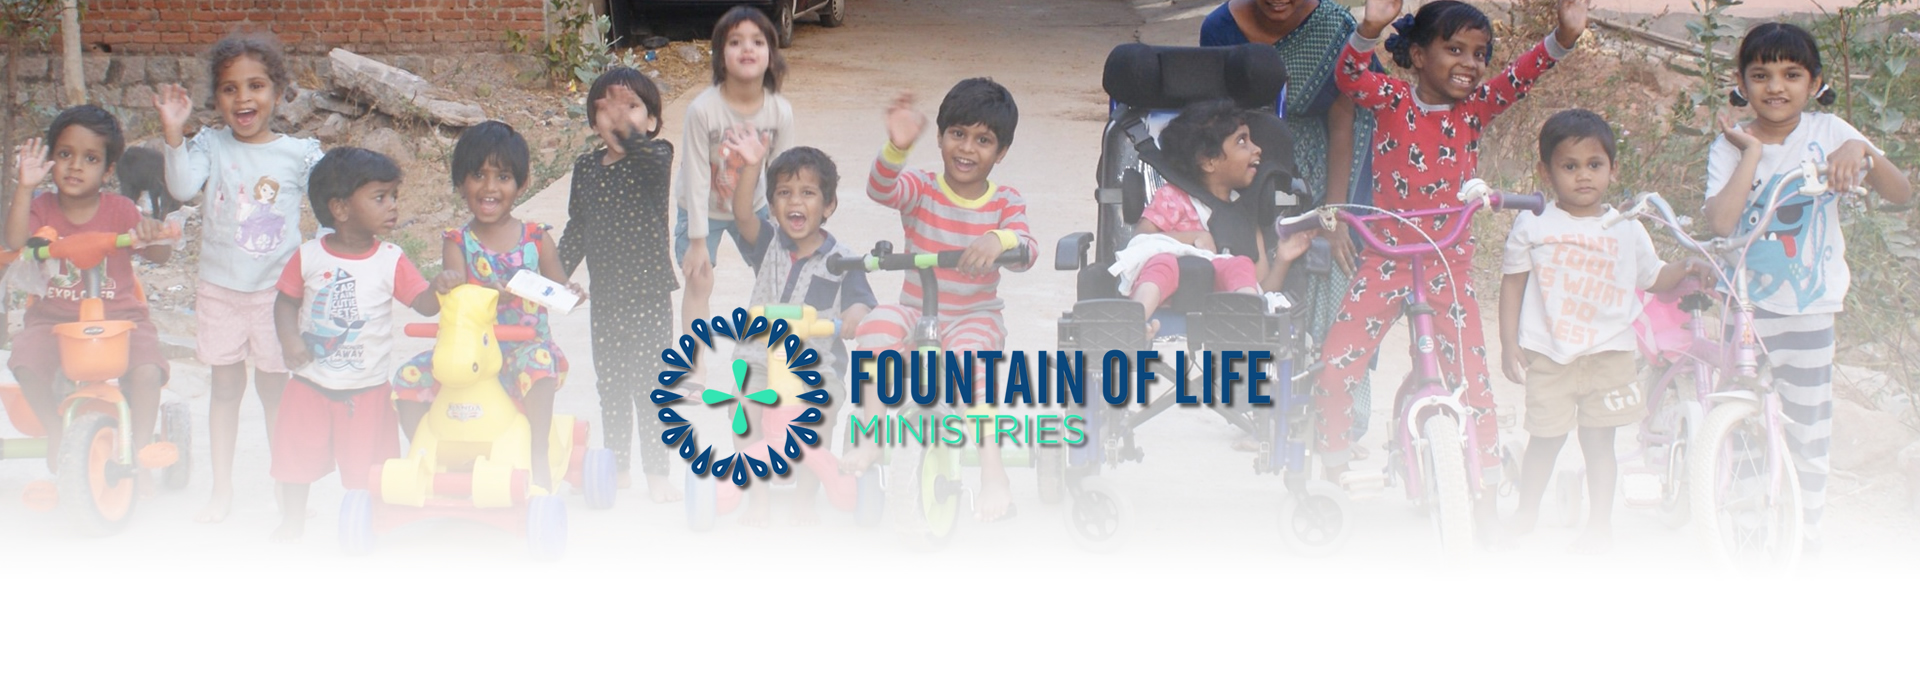 fountain of life banner7